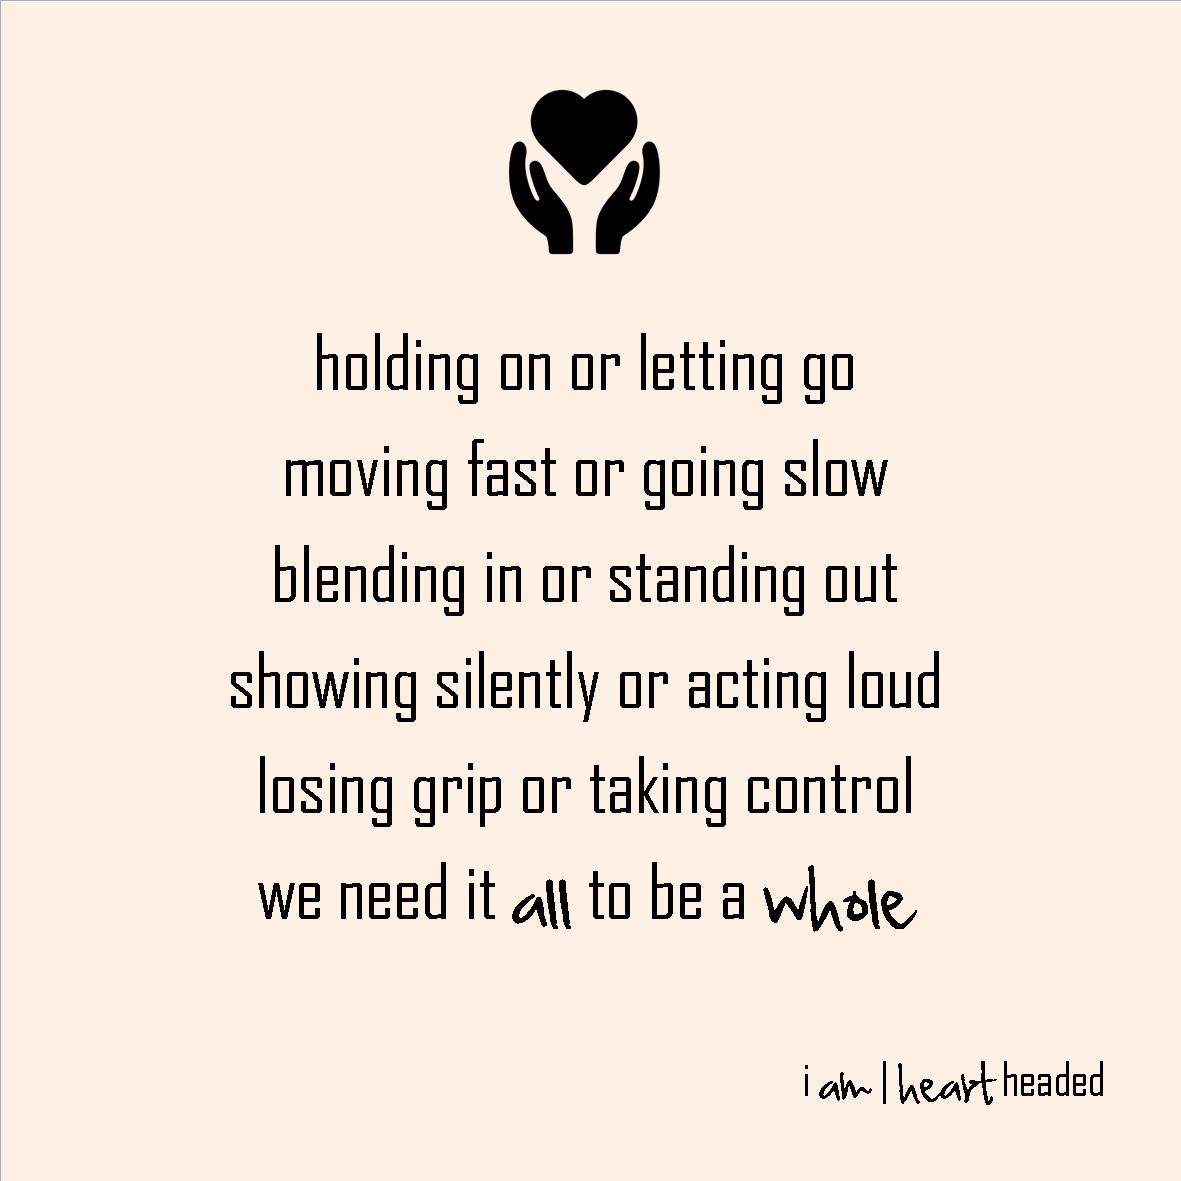 full-size featured image of quote 'we need it all' in category 'sparkly' at i am | heart headed